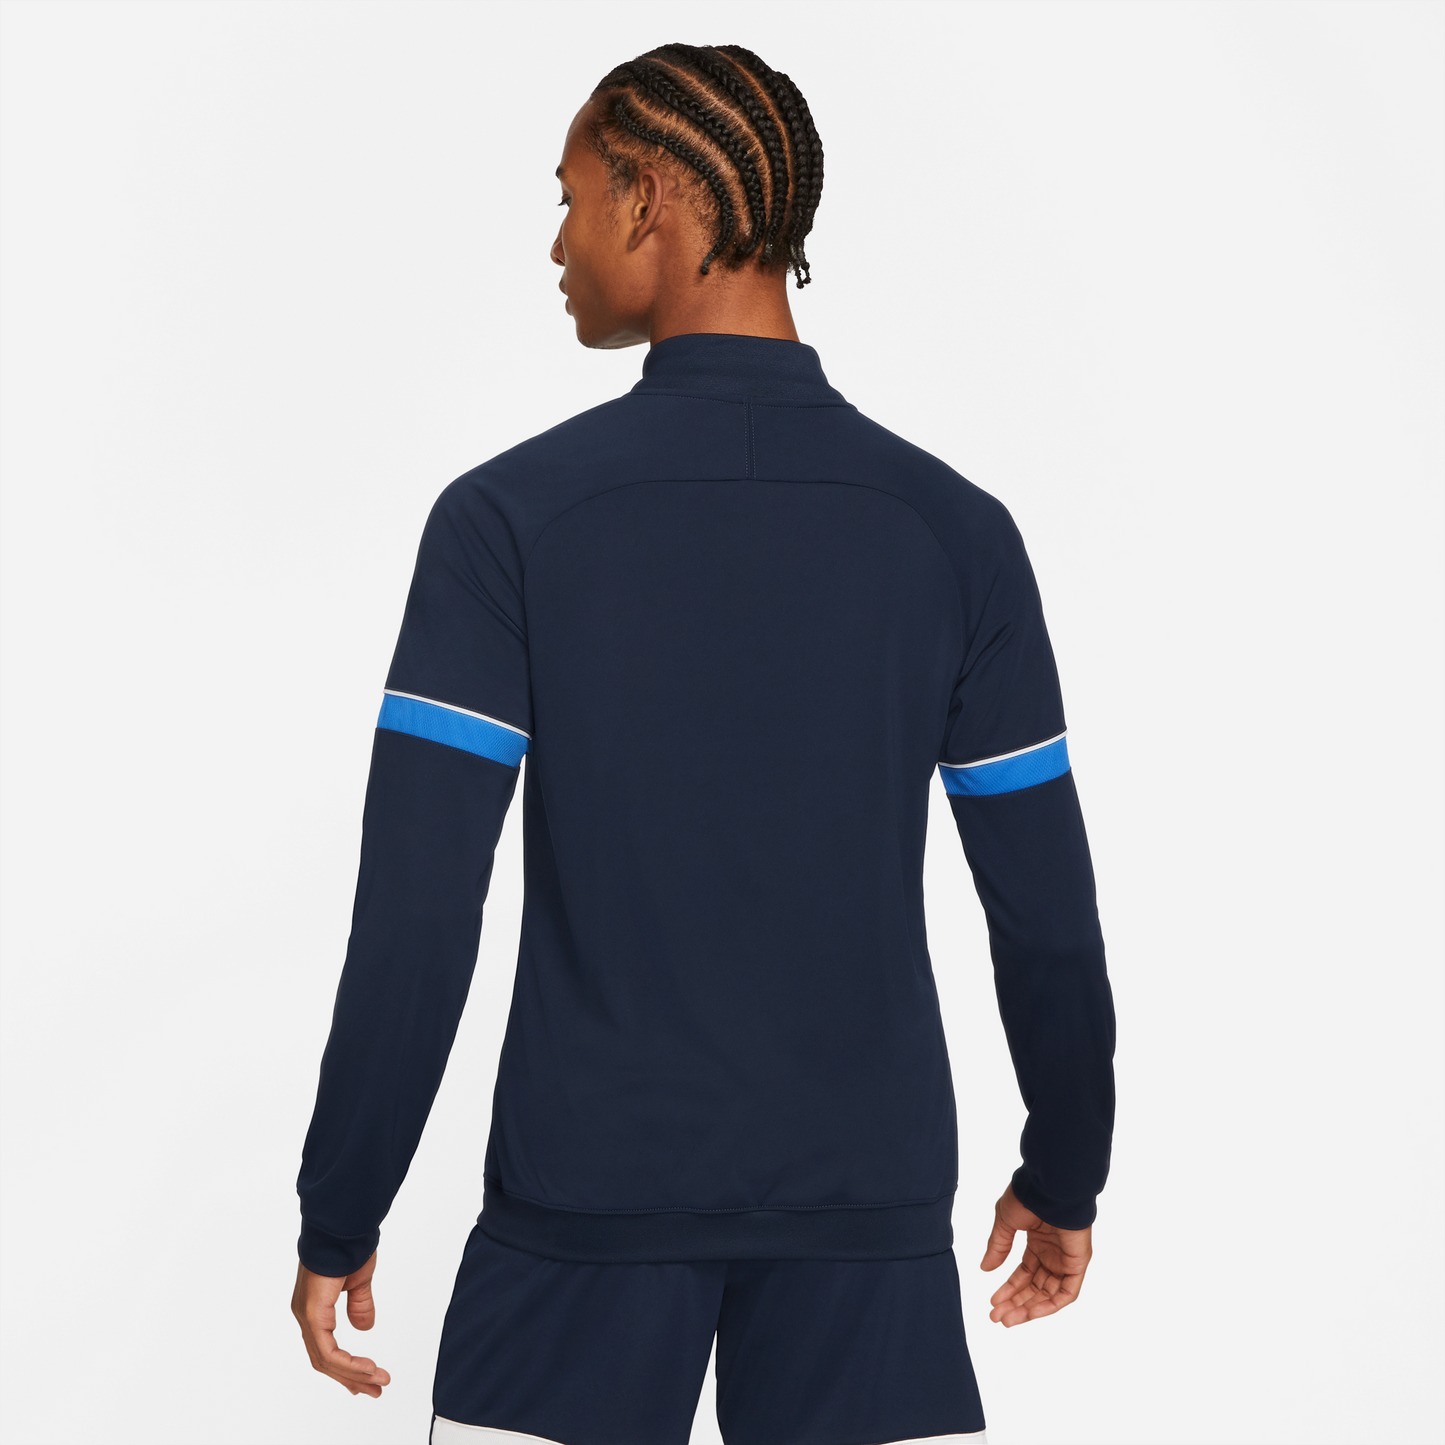 LEVIN AFC NIKE TRACK JACKET - YOUTH'S